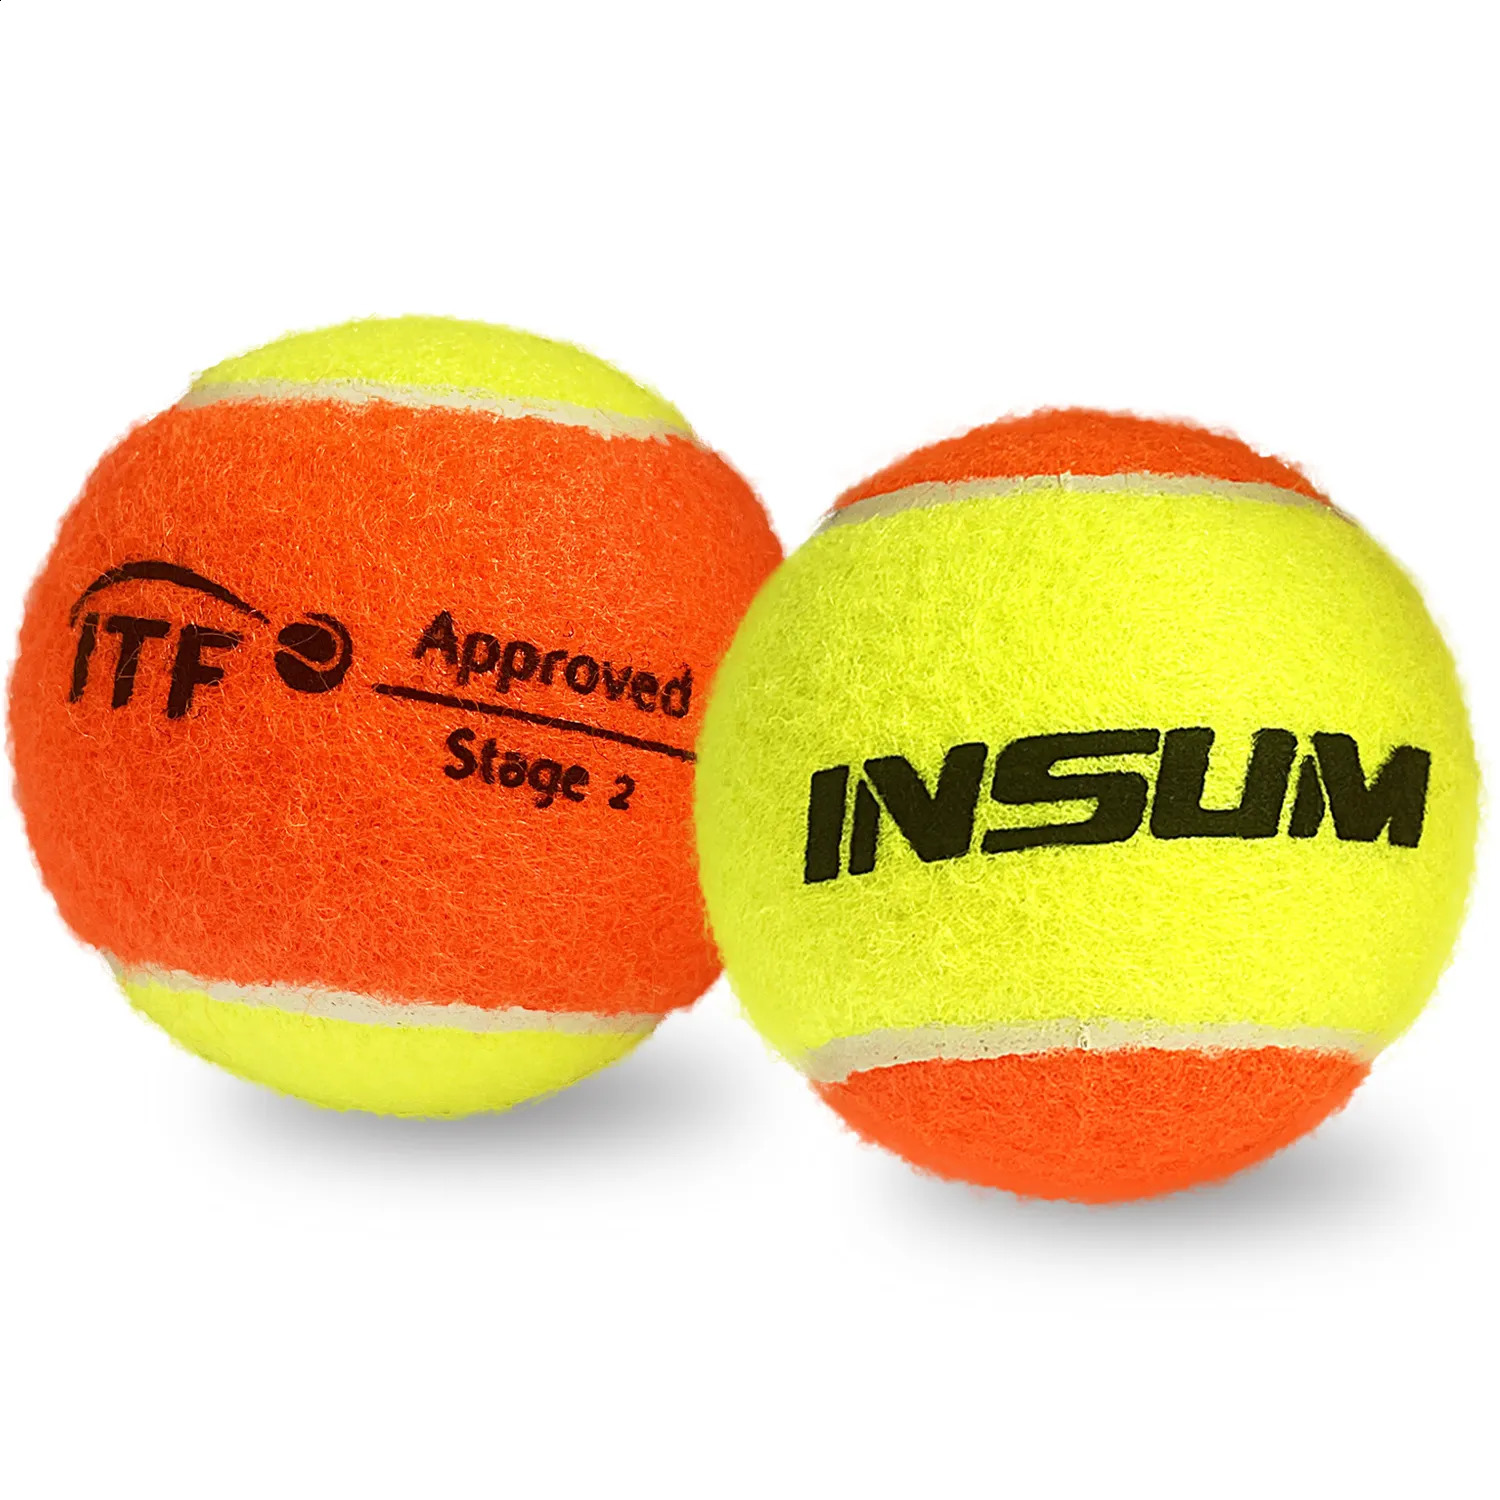 Squash Racquets Beach Tennis Ball 6 ITF Approved Stage 2 Balls 50 Low Compression for Beginners Training PET Dog 231109